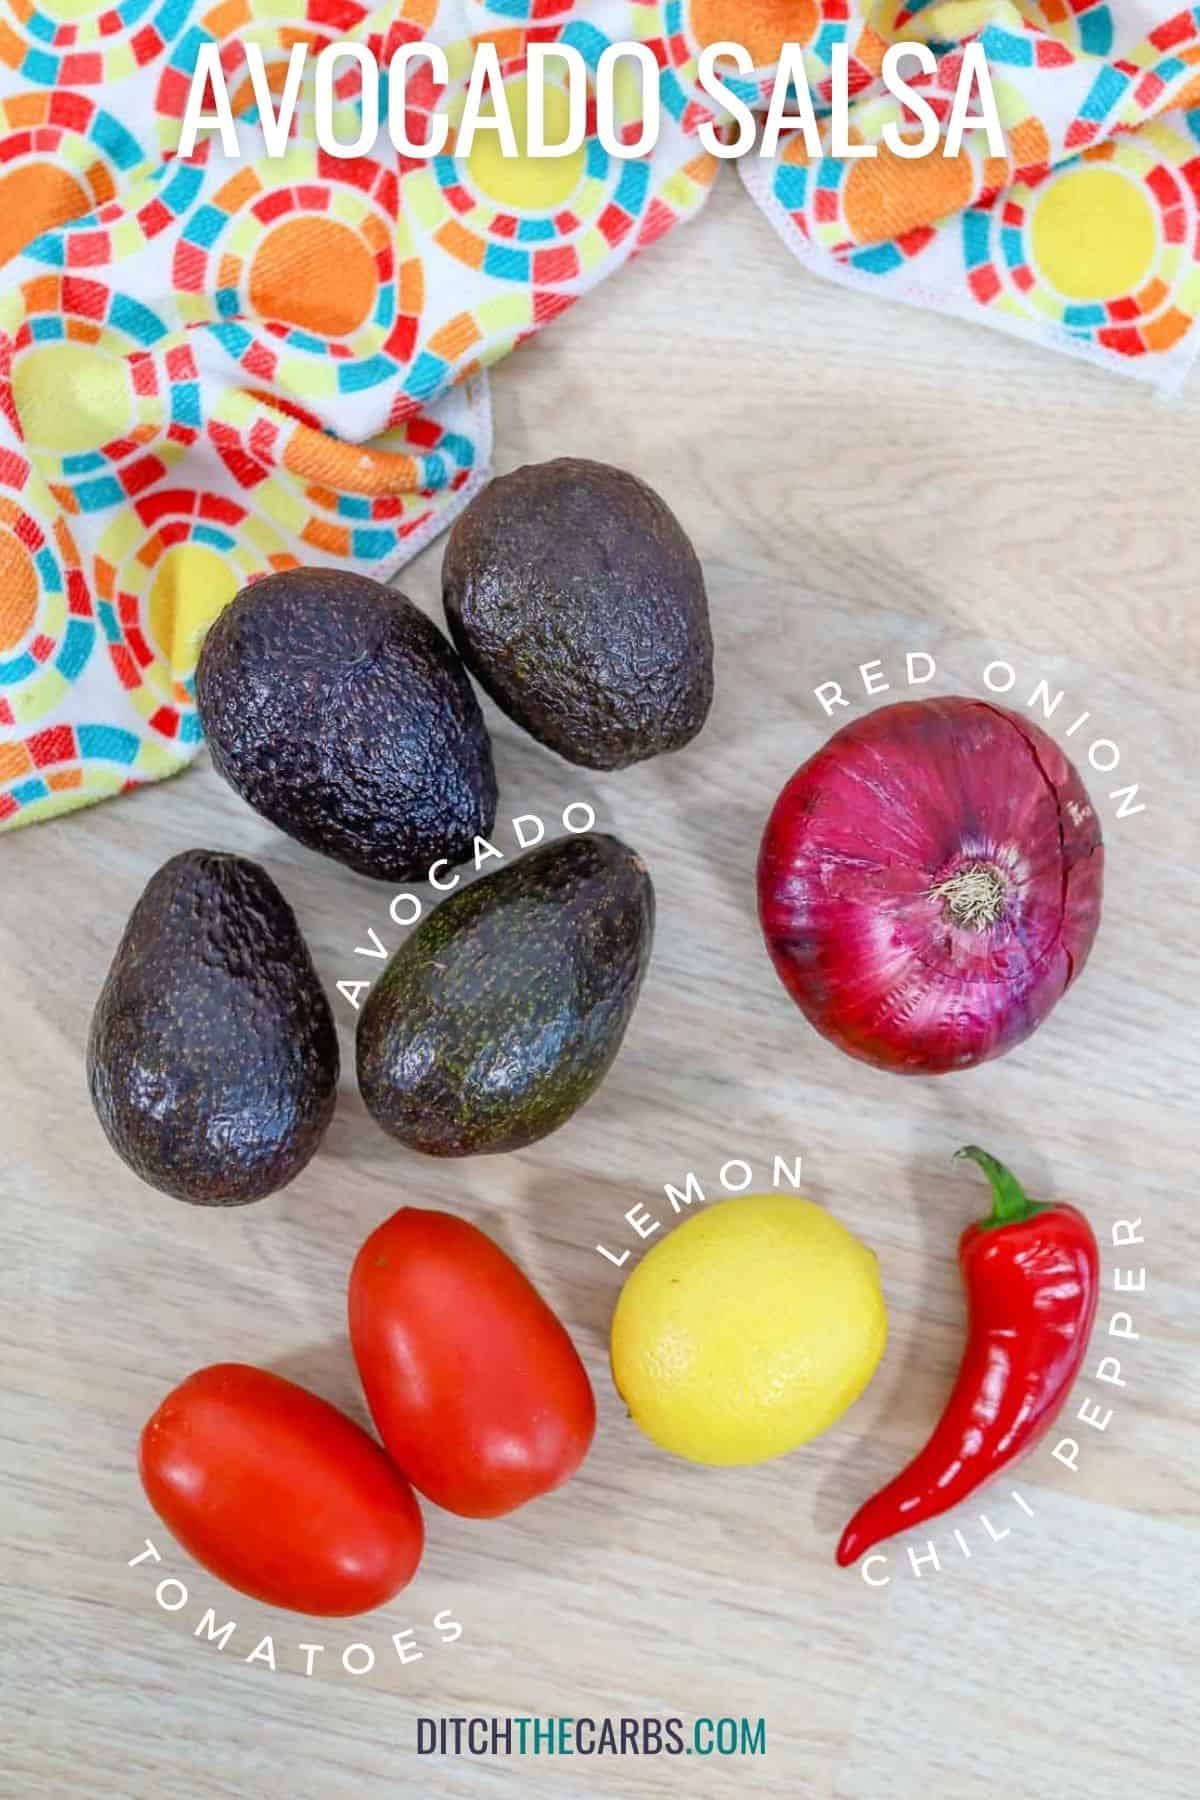 labelled ingredients needed to make homemade guacamole